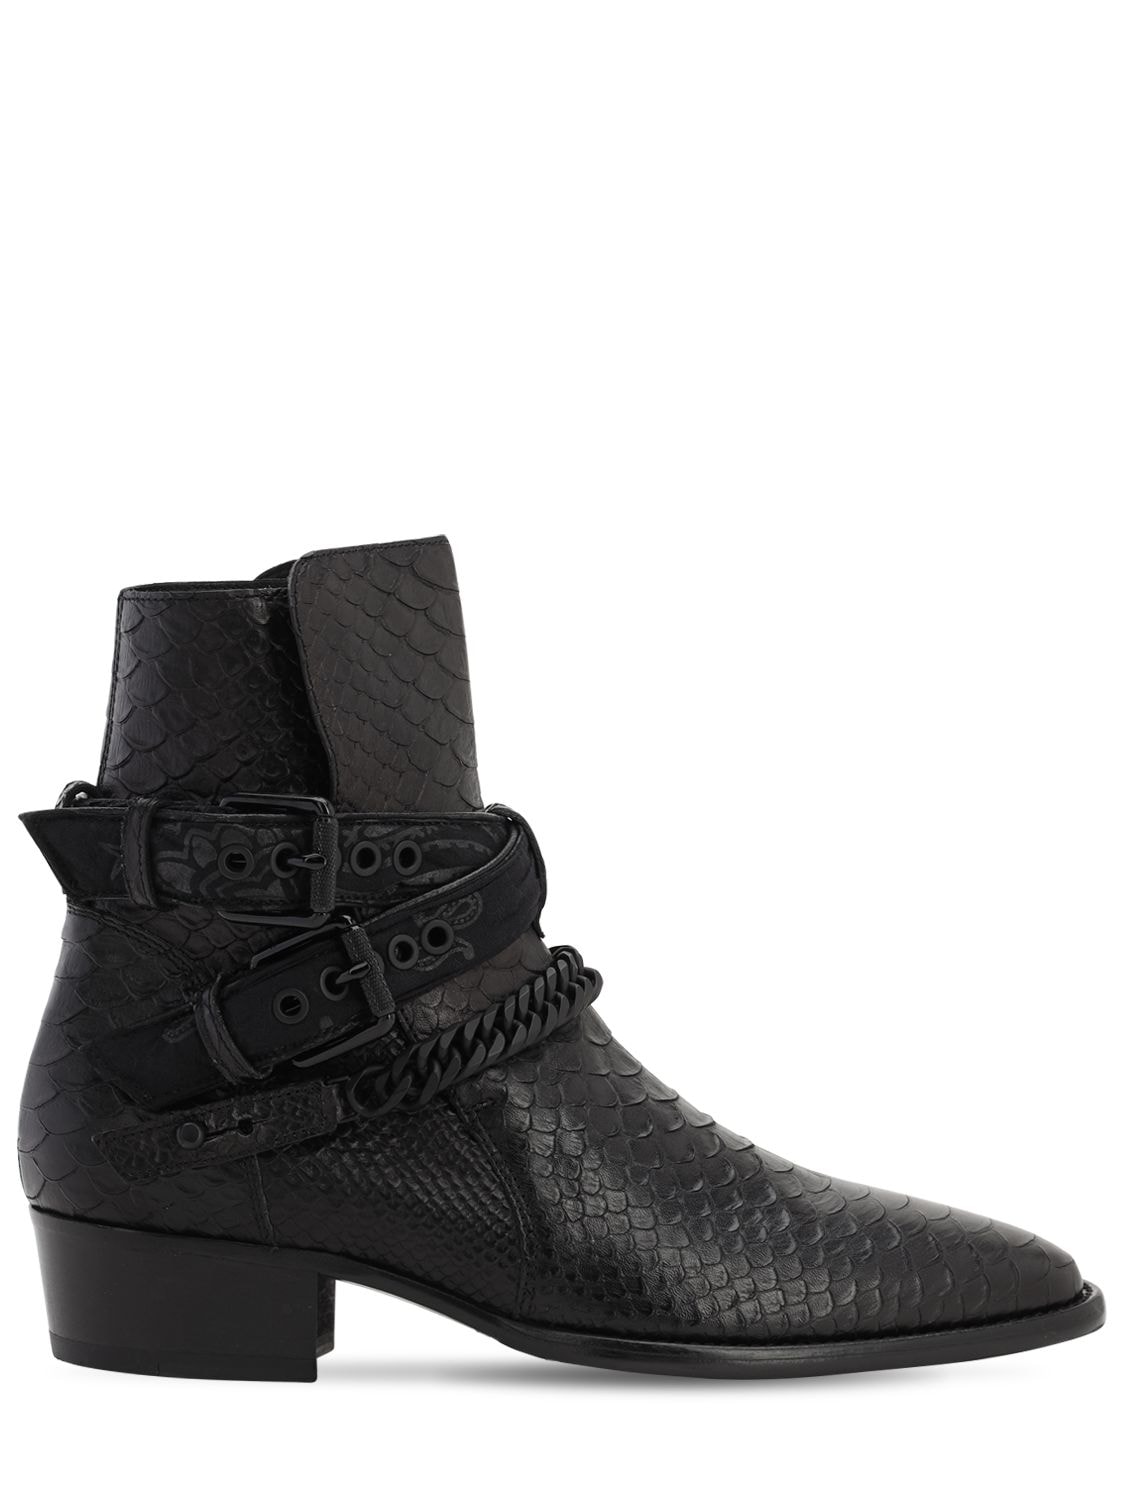 Python Embossed Buckle Leather Boots